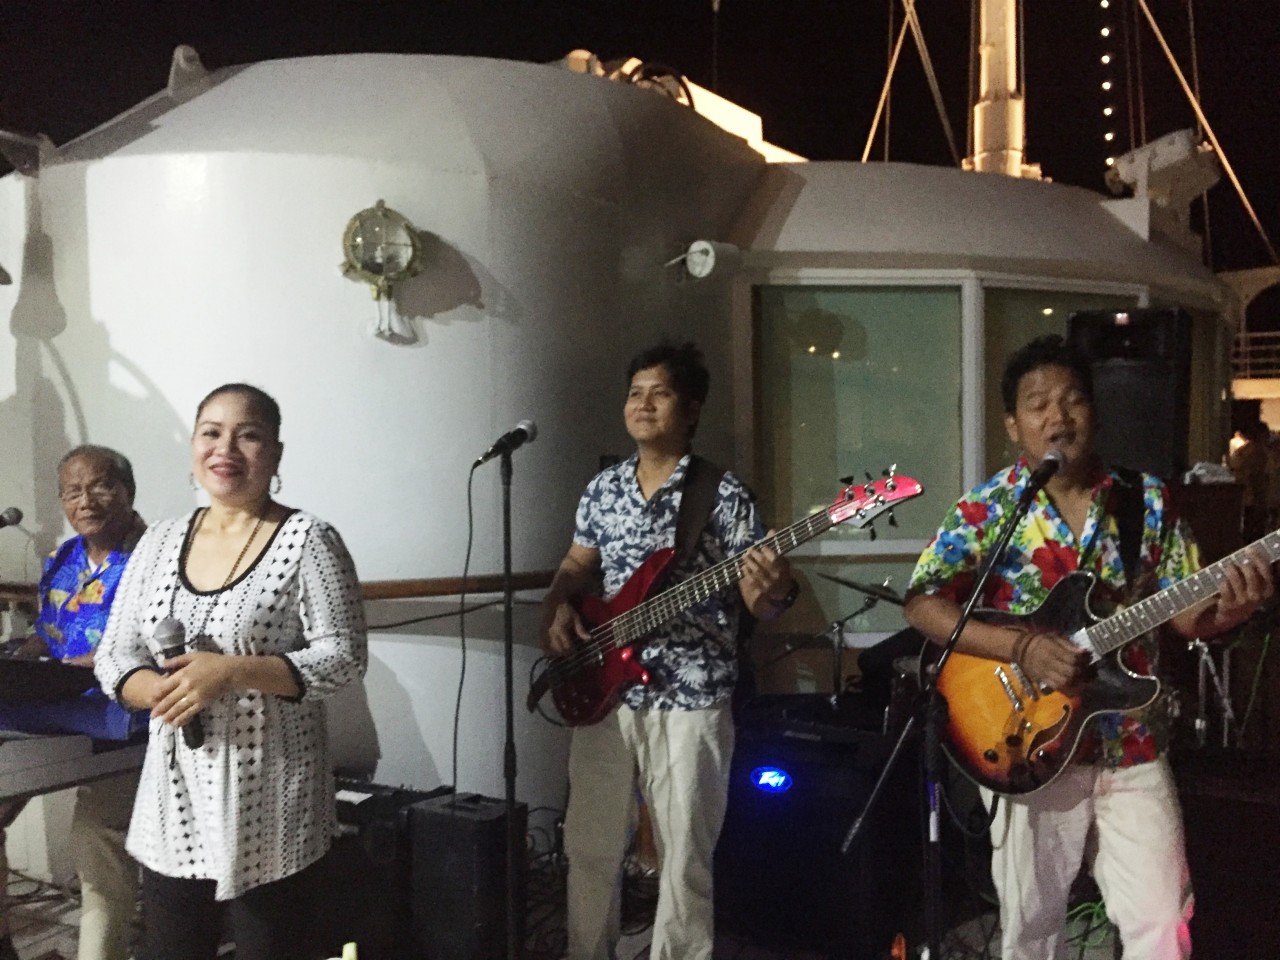 Dining under the stars with Windstar Cruises ! Live singing and music with "Top Society" band